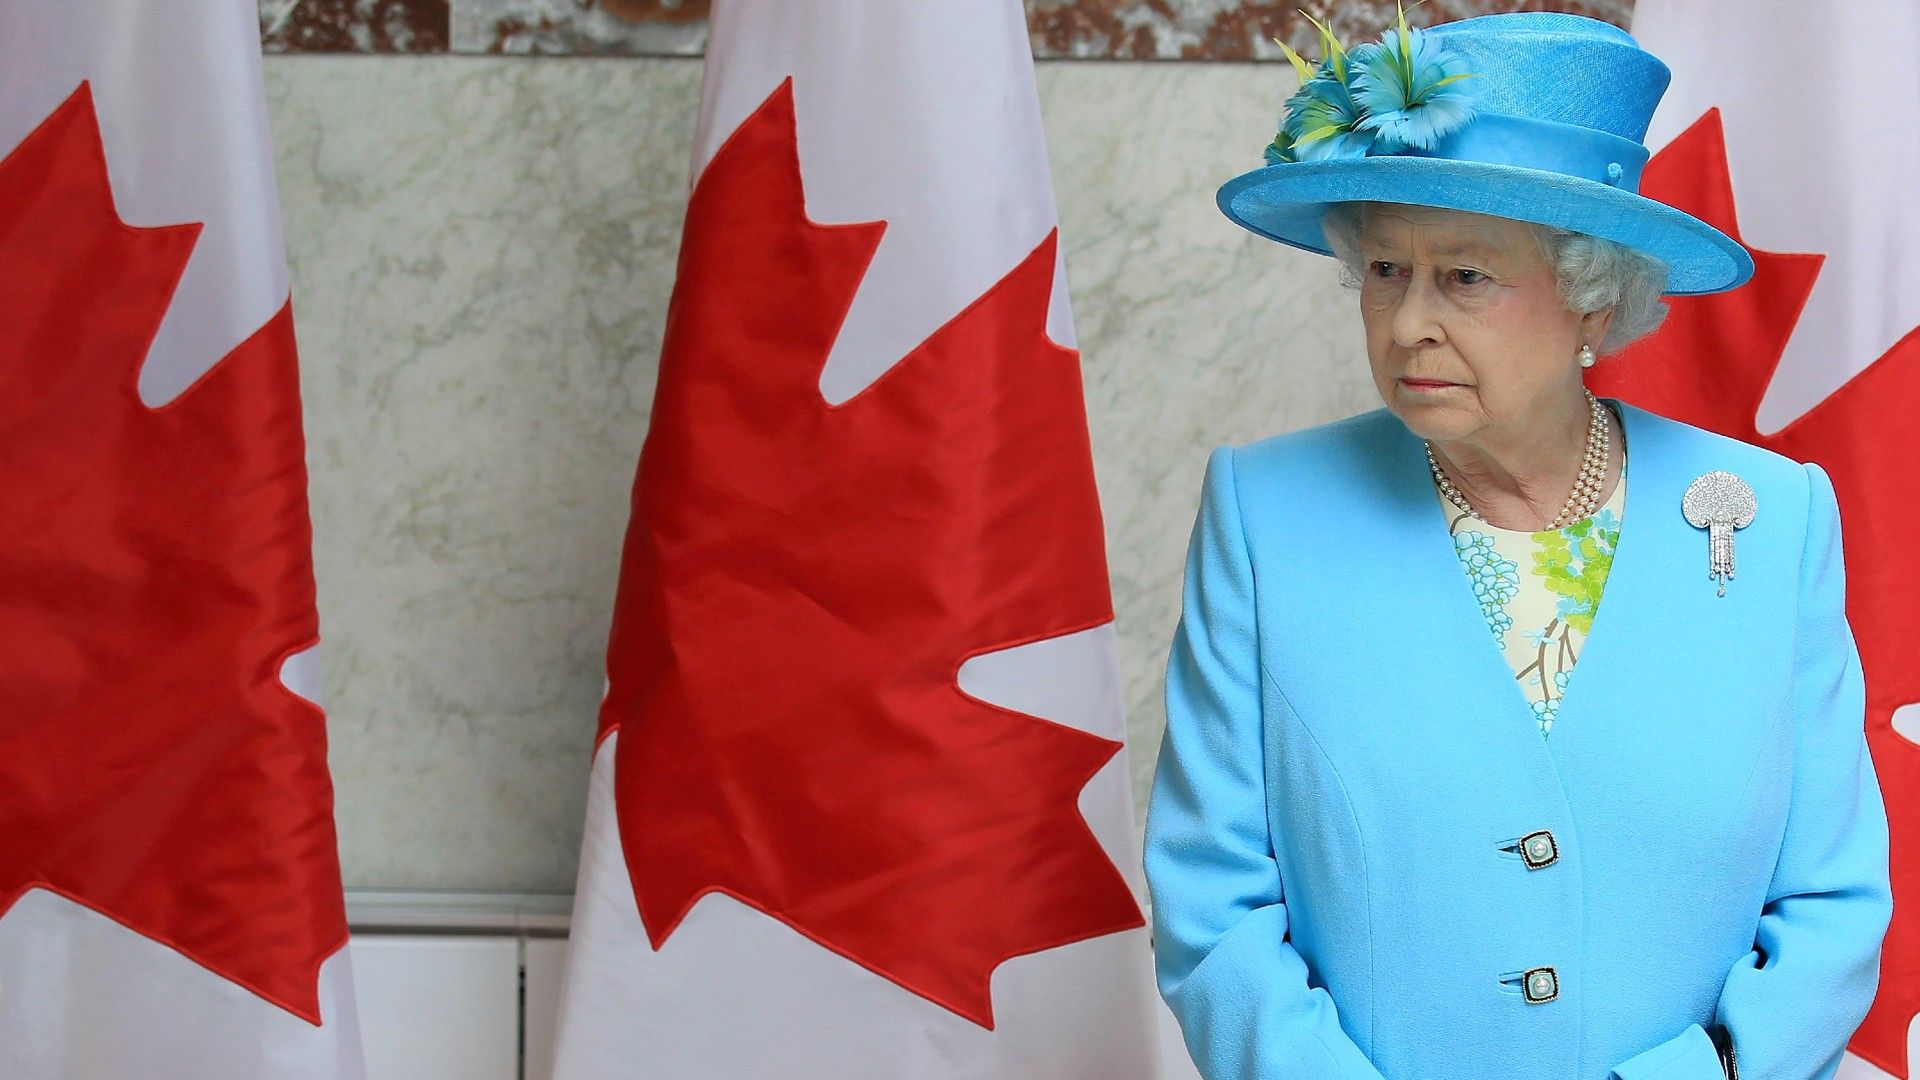 <p>                     Queen Elizabeth undertook her final tour of Canada in 2010, and it was an important visit, as Canada was the country the monarch visited the most throughout her 70-year reign.                   </p>                                      <p>                     It’s estimated that she undertook 22 different royal tours of Canada, one of the member states of the Commonwealth, so it was fitting that it was one of her very final visits abroad at the age of 84.                   </p>                                      <p>                     But despite being in her 80s, she and Philip’s trip to Canada was no less busy than usual! They visited between June and July, meaning they were there for Canada Day, a day of annual celebrations. In fact, it was the seventh time the Queen was in the country for Canada Day. In a speech on Parliament Hill that day, she highly praised the country, saying, "This nation has dedicated itself to being a caring home for its own, a sanctuary for others and an example to the world."                   </p>